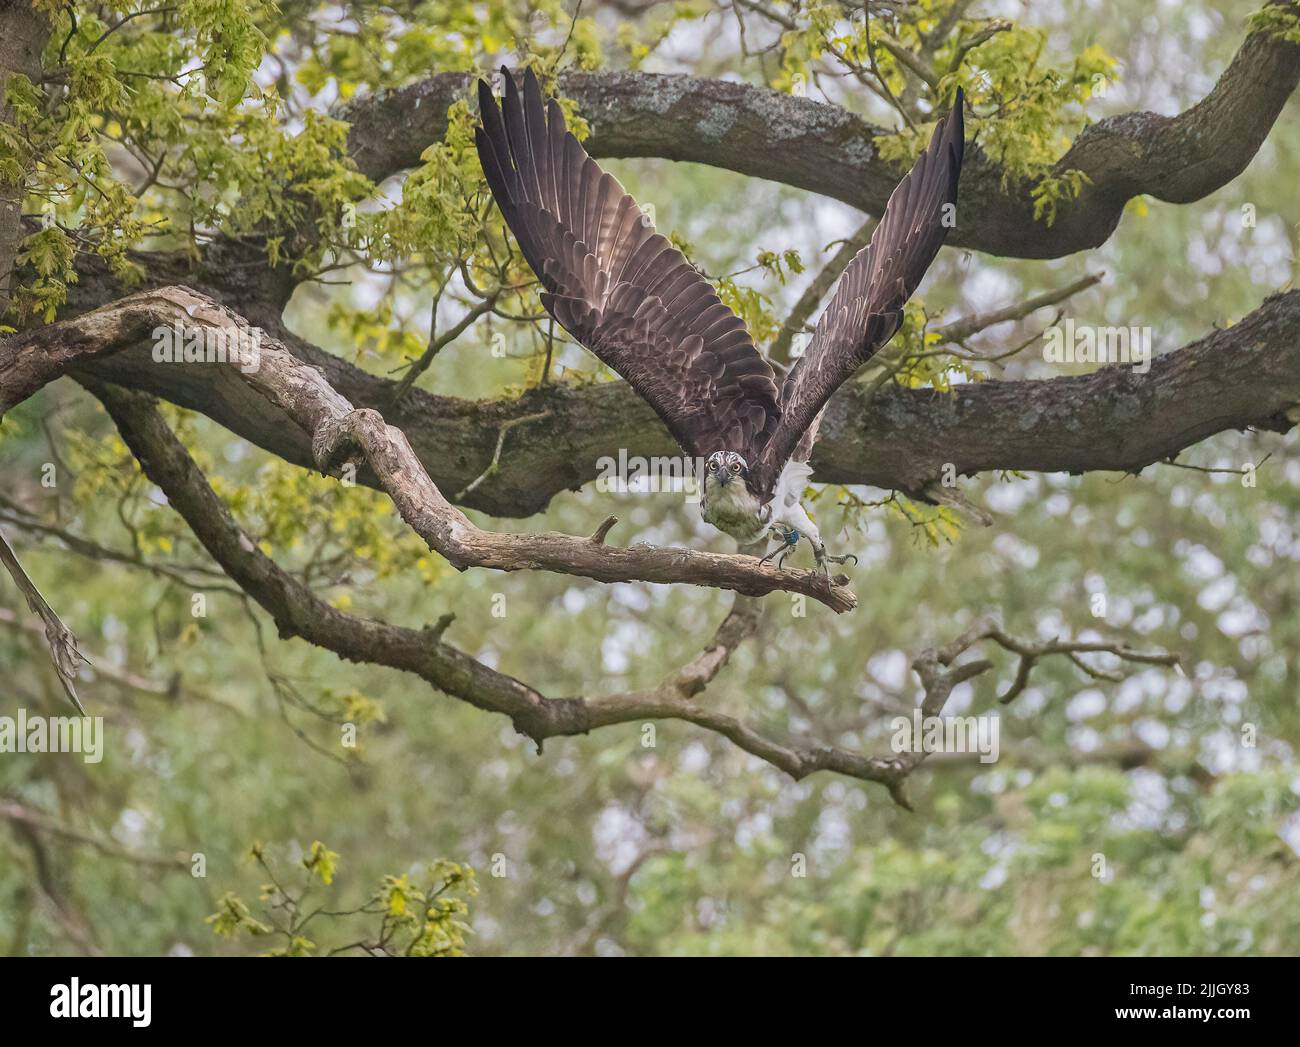 An unusual shot of an Osprey on the start of his dive in an ancient oak tree. just taking off and focussed on the task ahead. Rutland UK Stock Photo